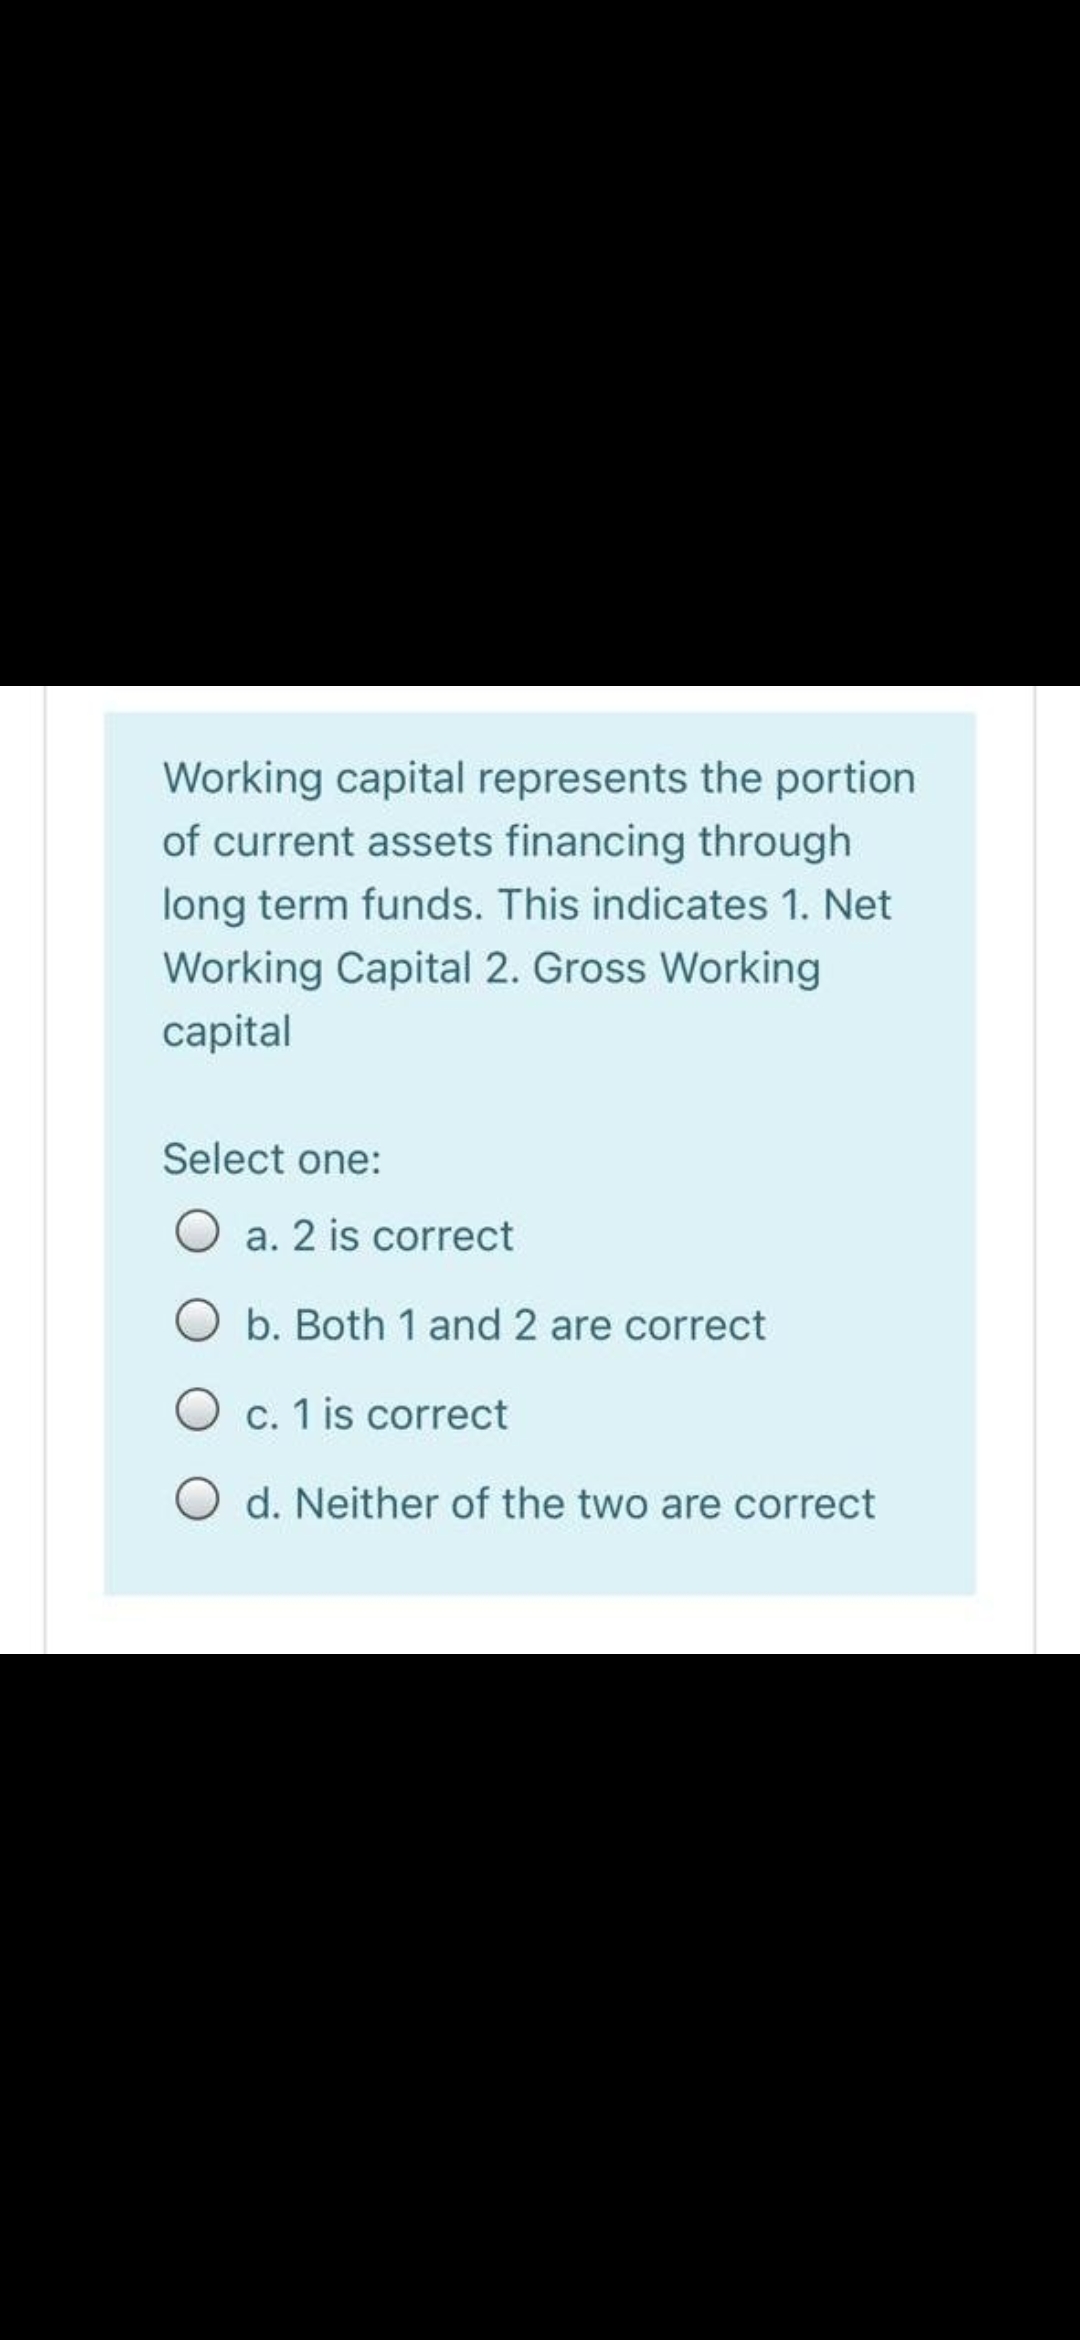 Working capital represents the portion
of current assets financing through
long term funds. This indicates 1. Net
Working Capital 2. Gross Working
capital
Select one:
O a. 2 is correct
O b. Both 1 and 2 are correct
O c. 1 is correct
O d. Neither of the two are correct
